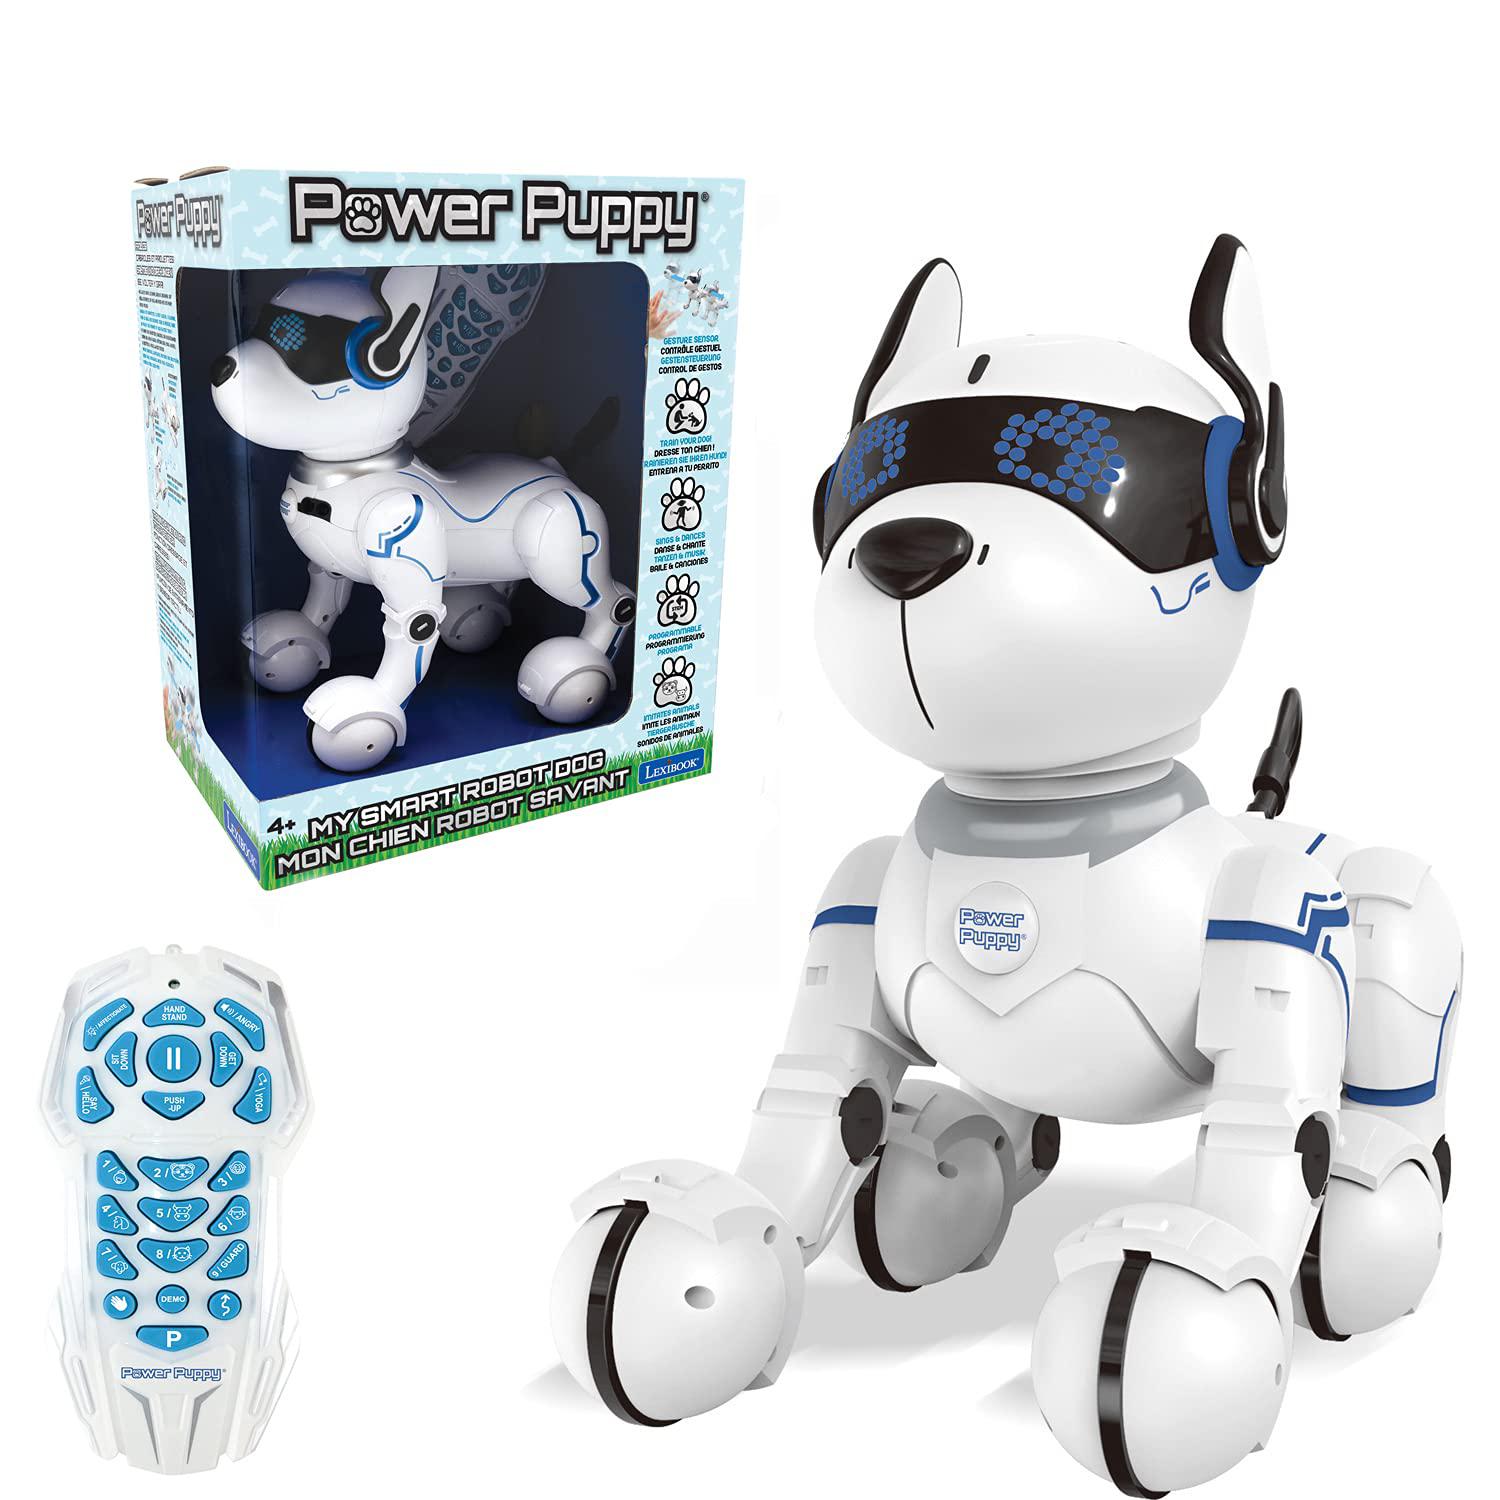 LEXiBOOK Power Puppy - My Smart Dog Robot to Train - Programmable Robot with Remote Control, Training and Gesture Control Functi